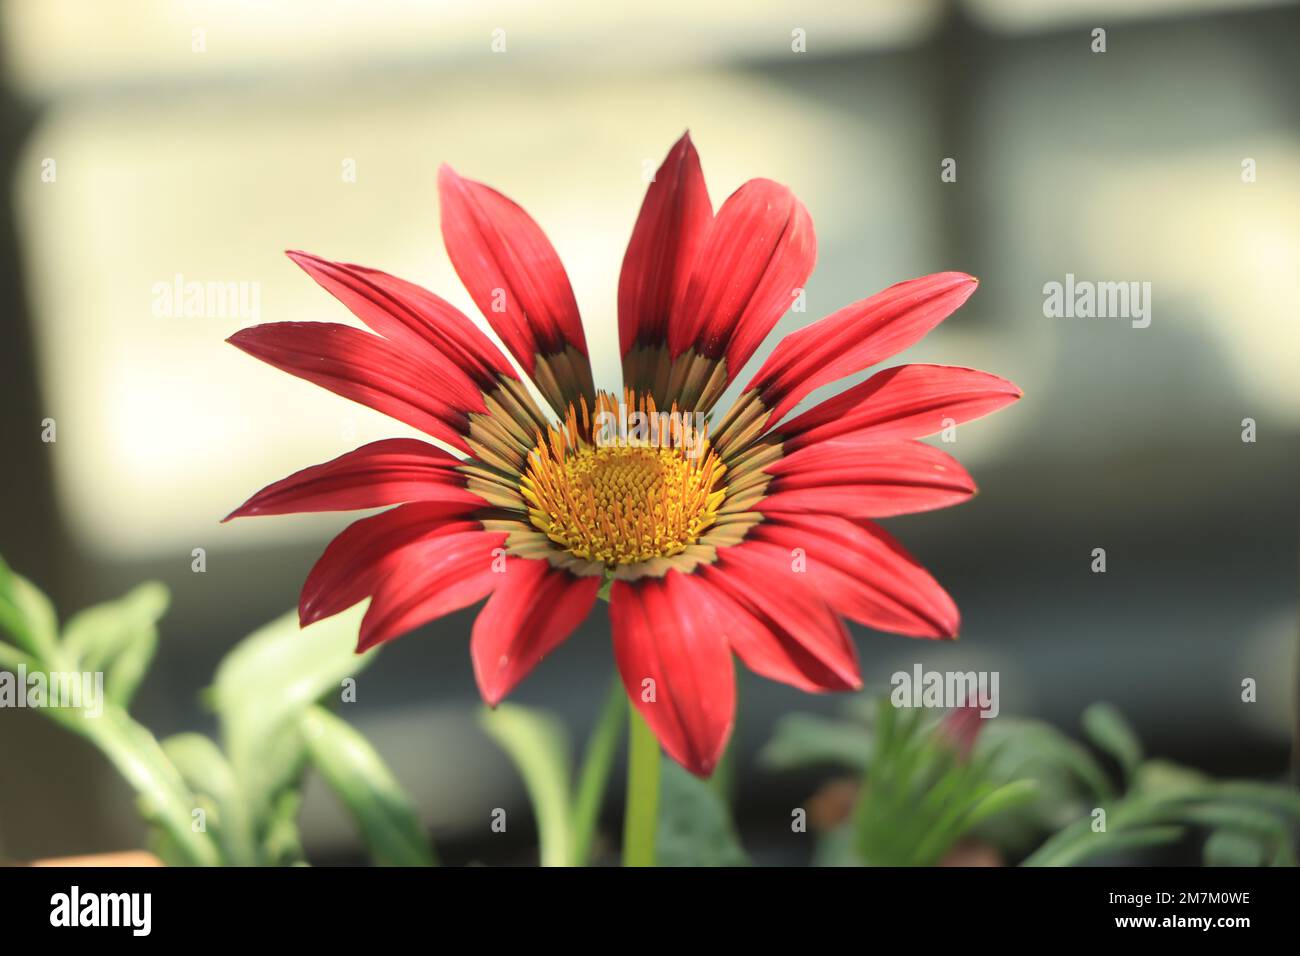 Colorful Gazania linearis flowers, close up. Gazania is ornamental flowering plant in the Asteraceae family. Stock Photo